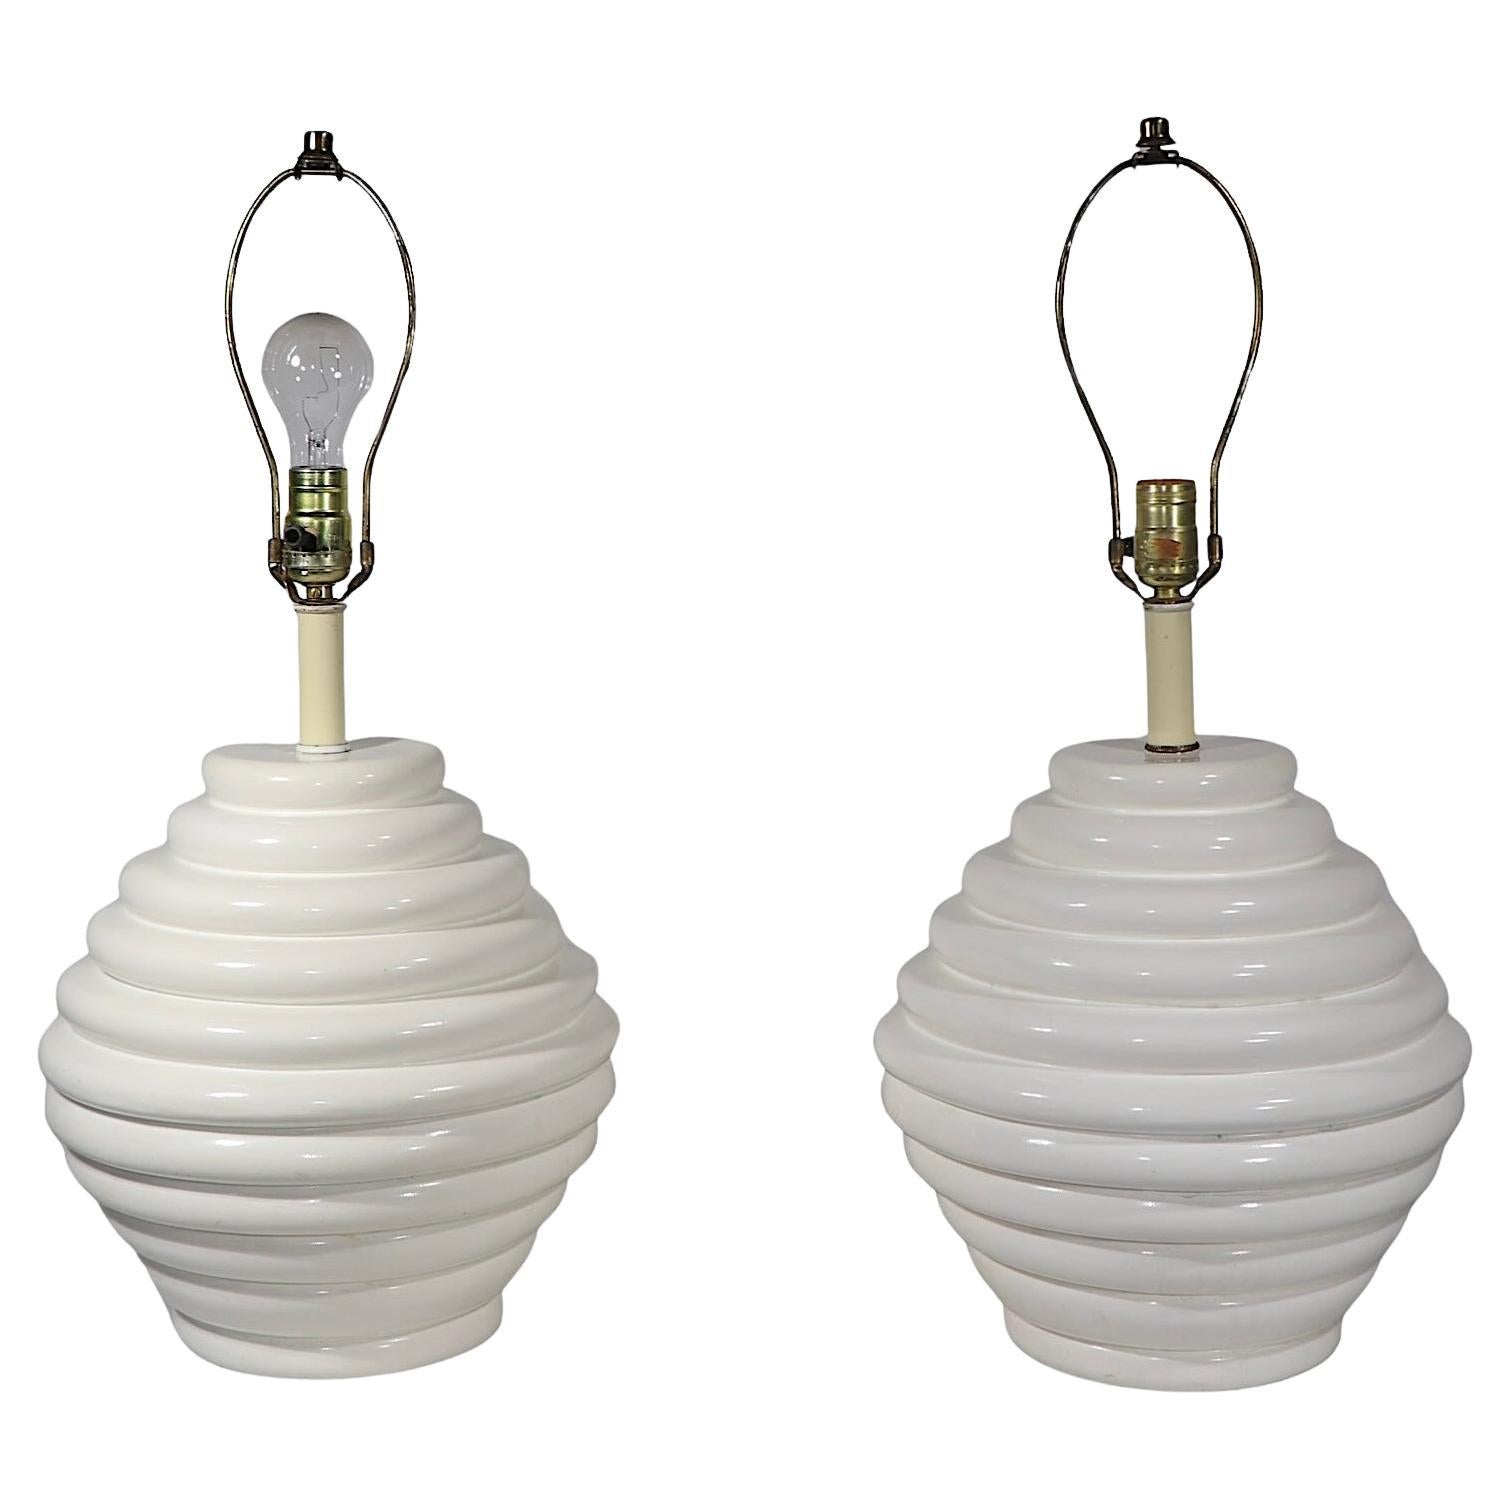 Pr. Mid Century Space Age Bulbous Form Table Lamps in White Finish c. 1950/70's For Sale